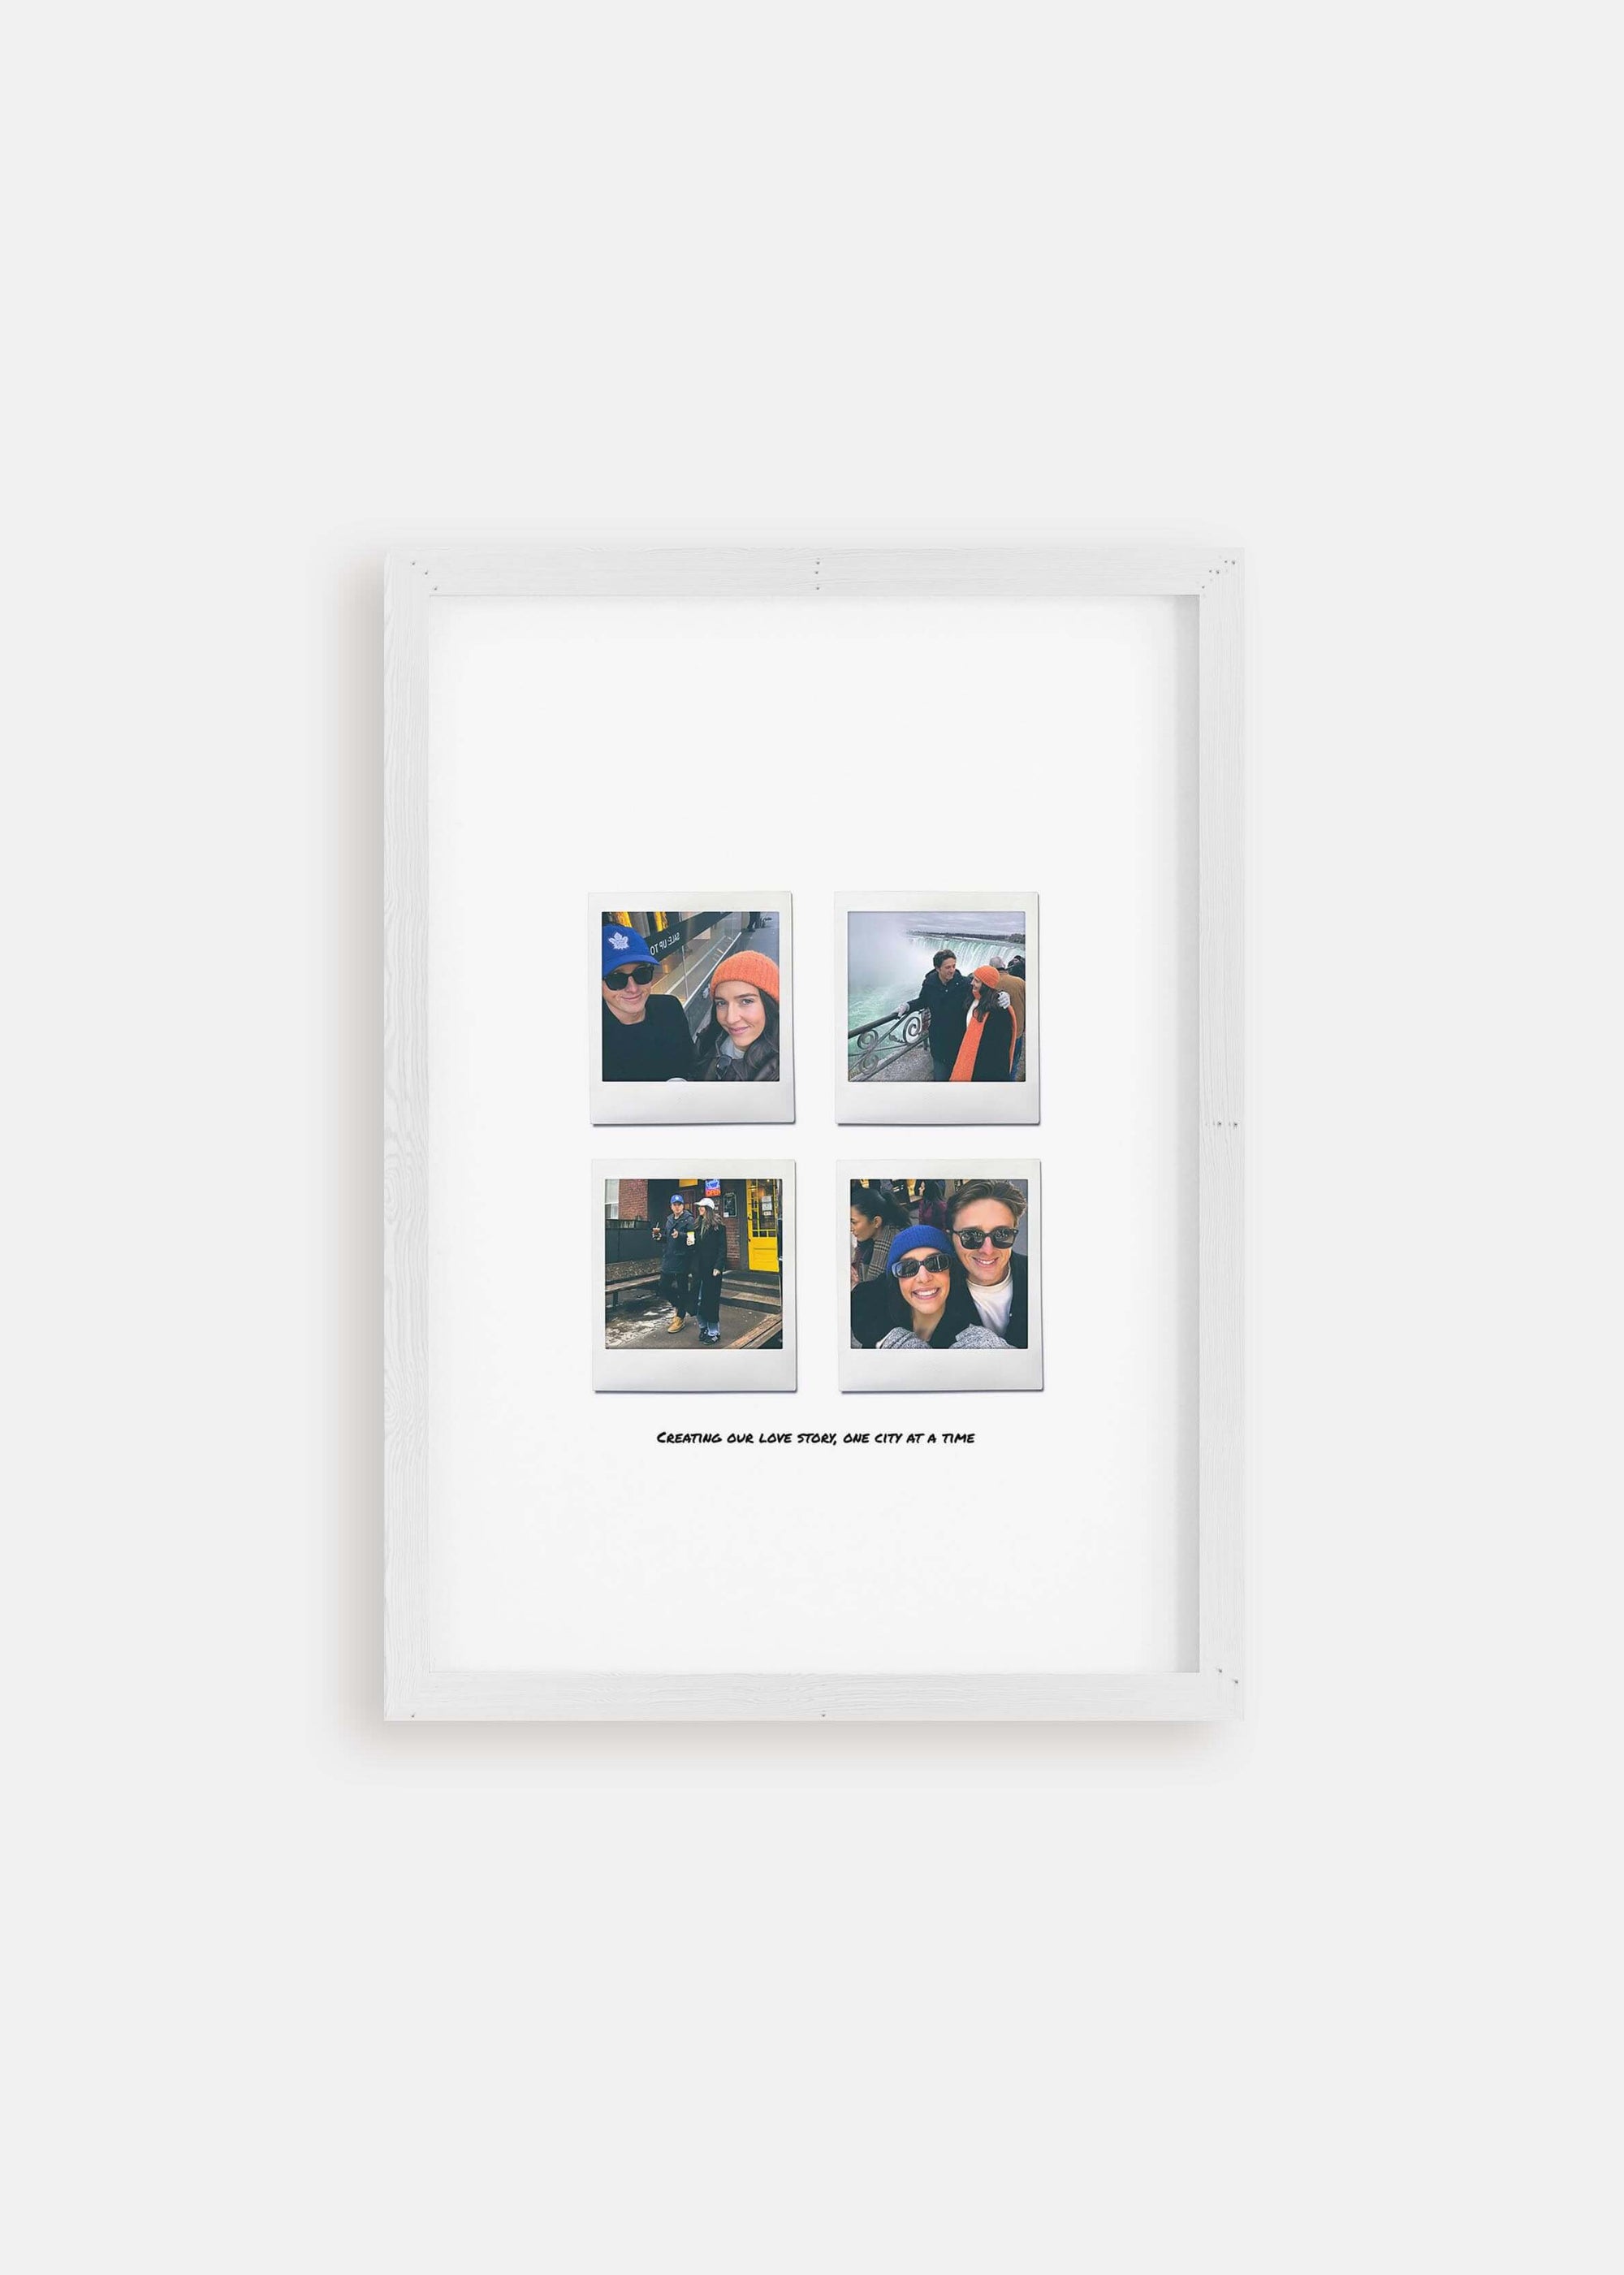 Personalized 4 Moments Instant Film Poster framed against a clean white background, featuring four custom-selected photographs arranged elegantly for a memorable display.